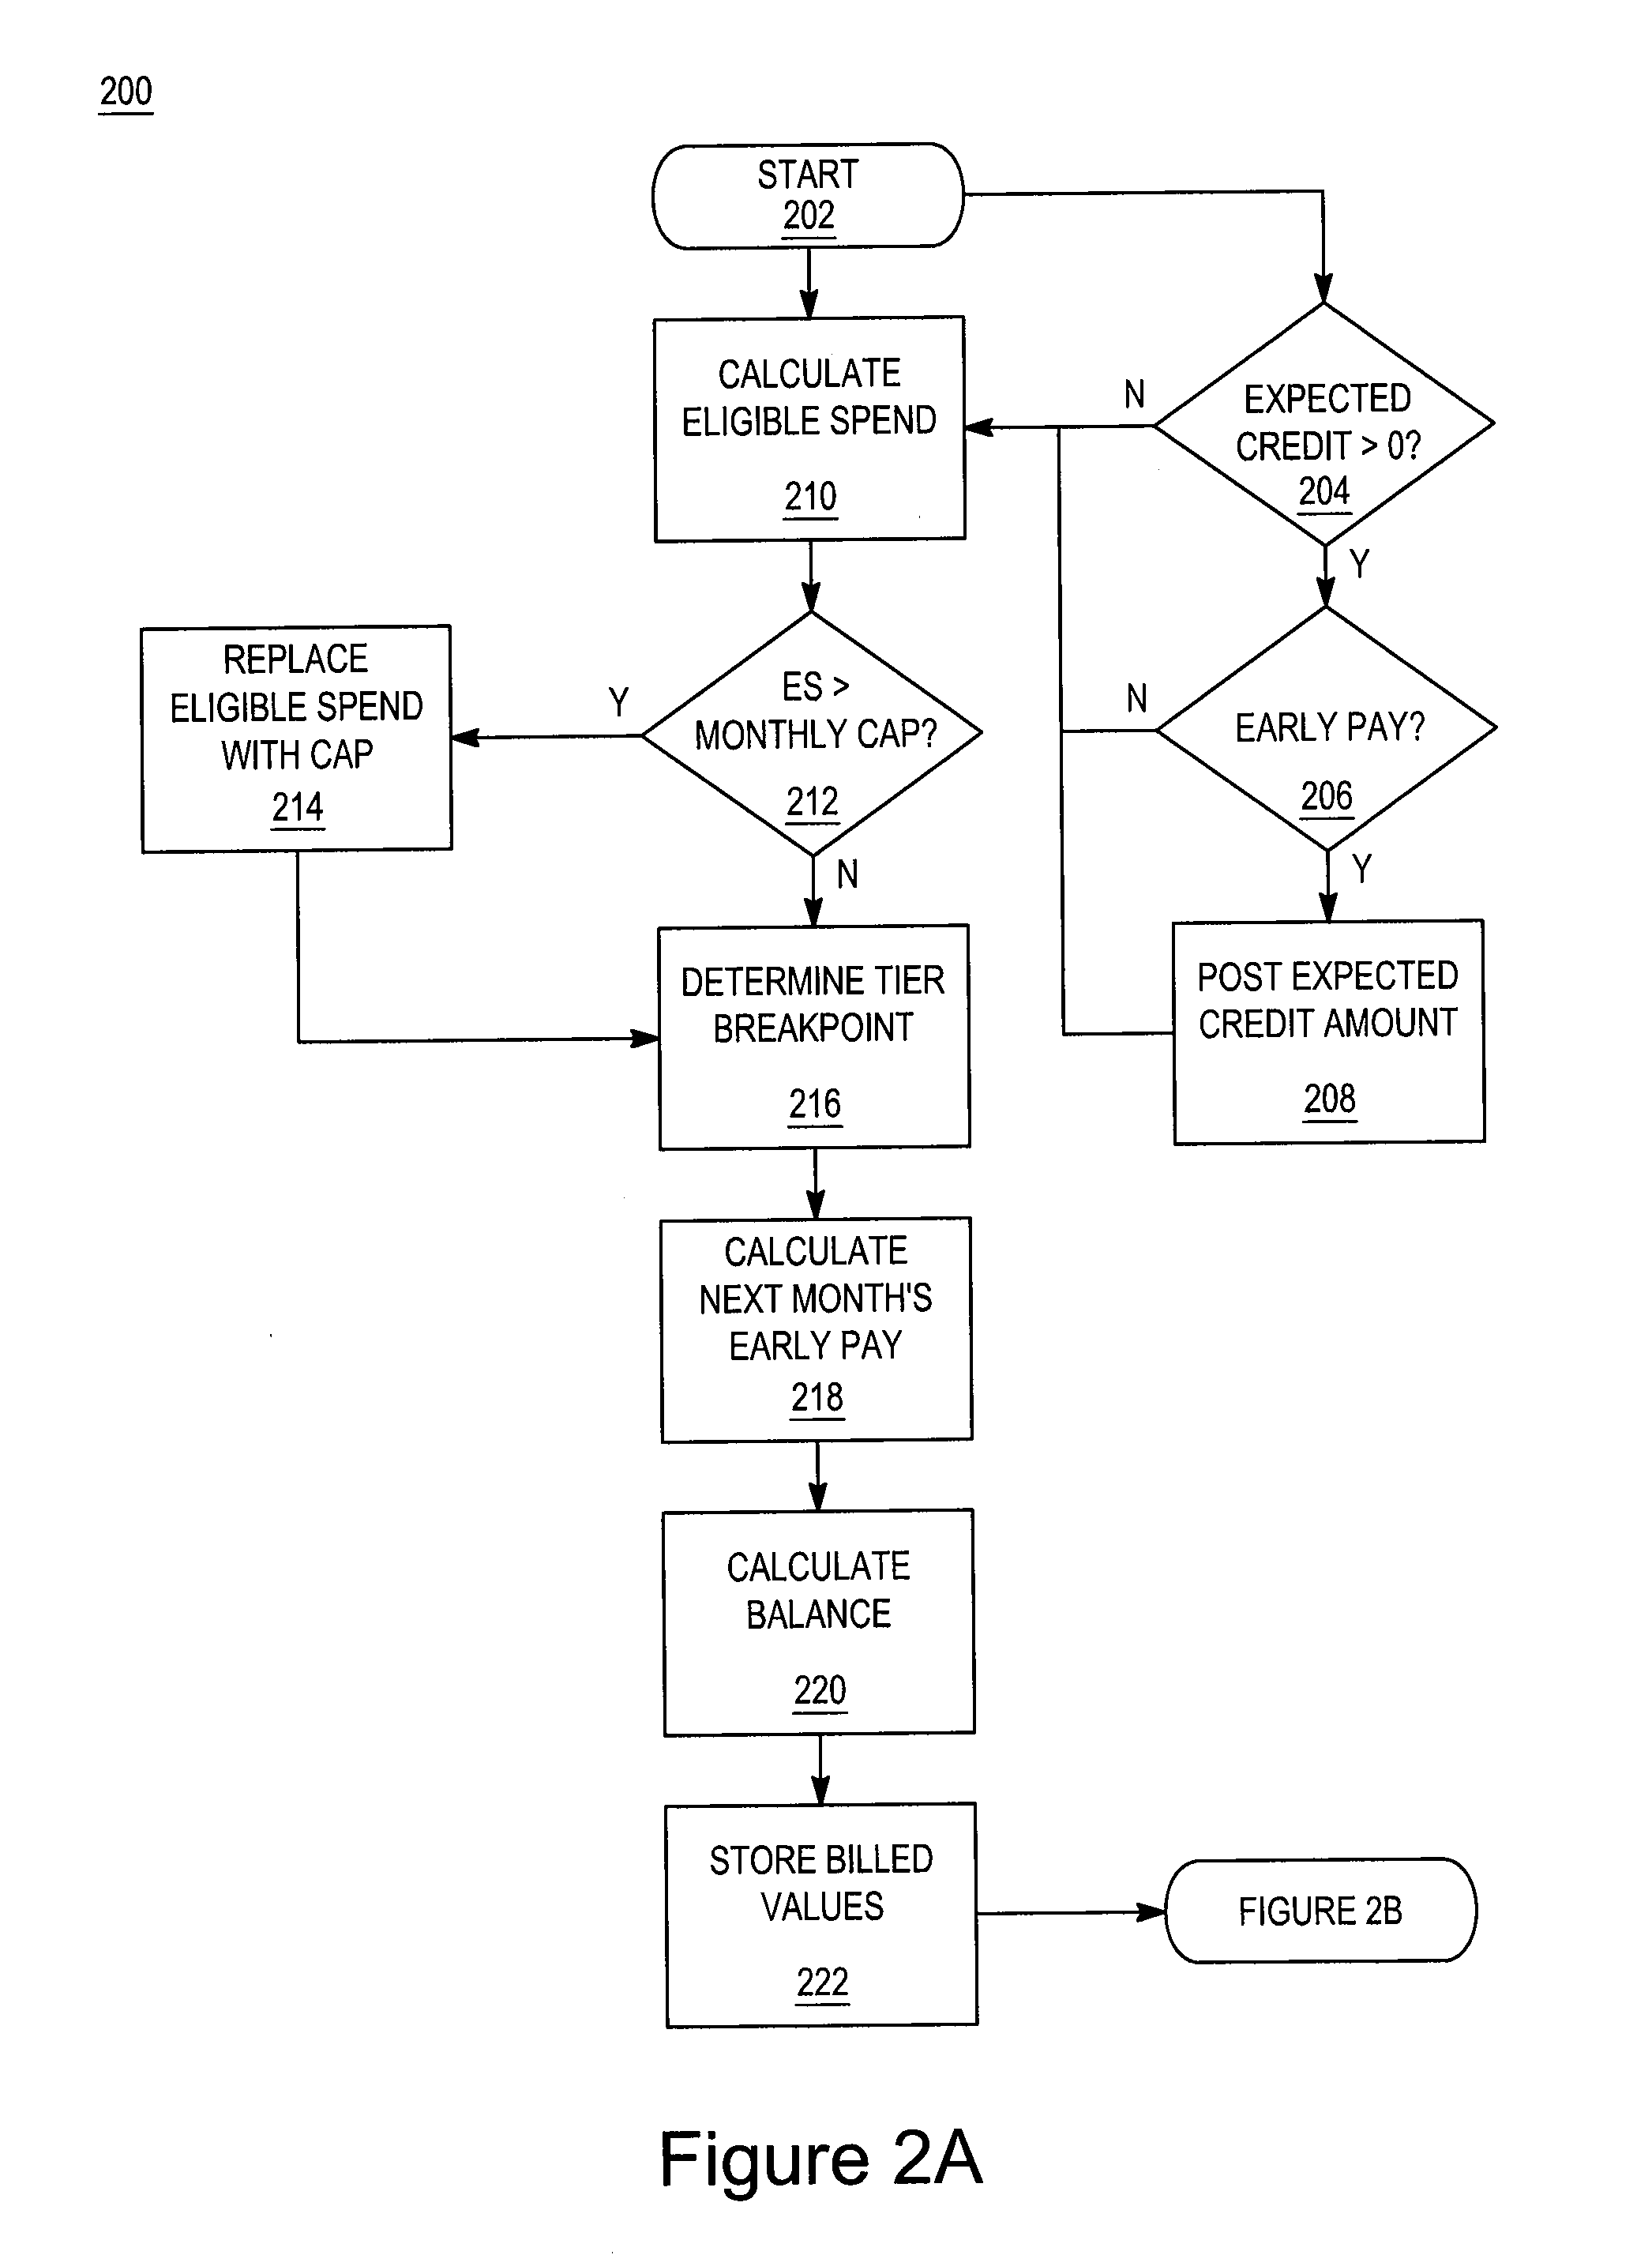 System and method for rewarding a consumer based upon positive behavior of a group